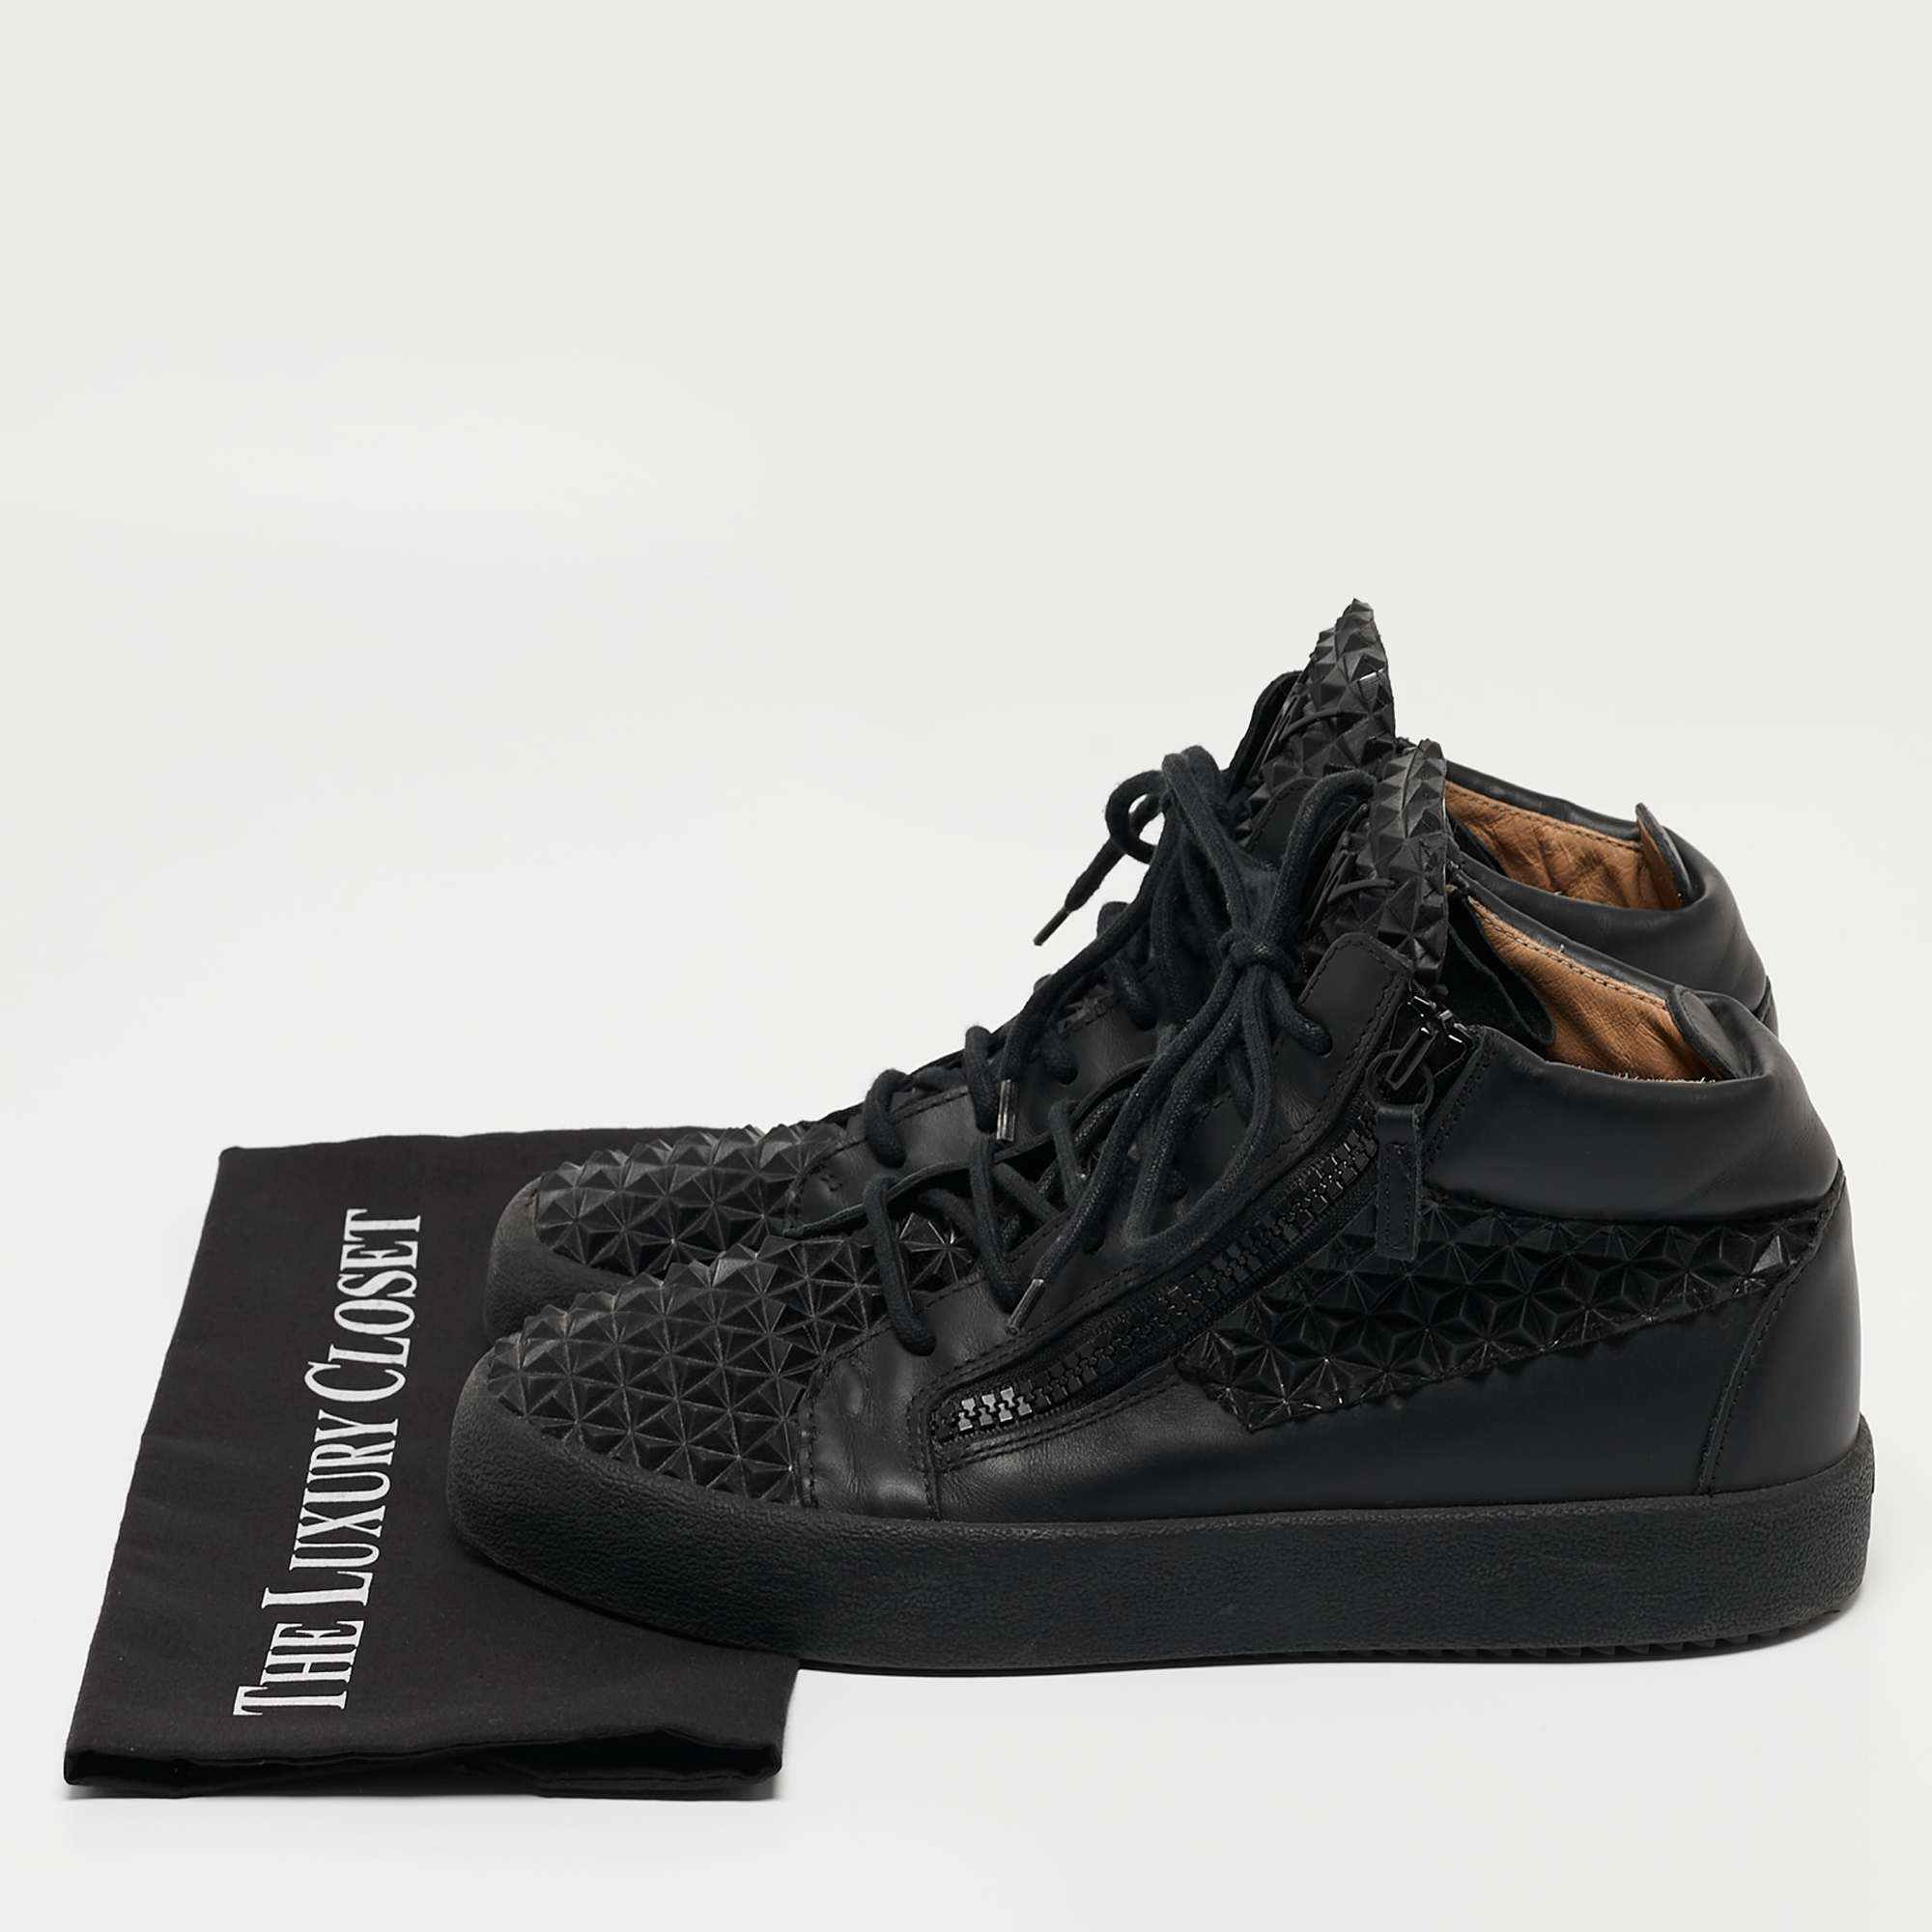 Giuseppe Zanotti Black Leather May London High Top Sneakers Size 41.5